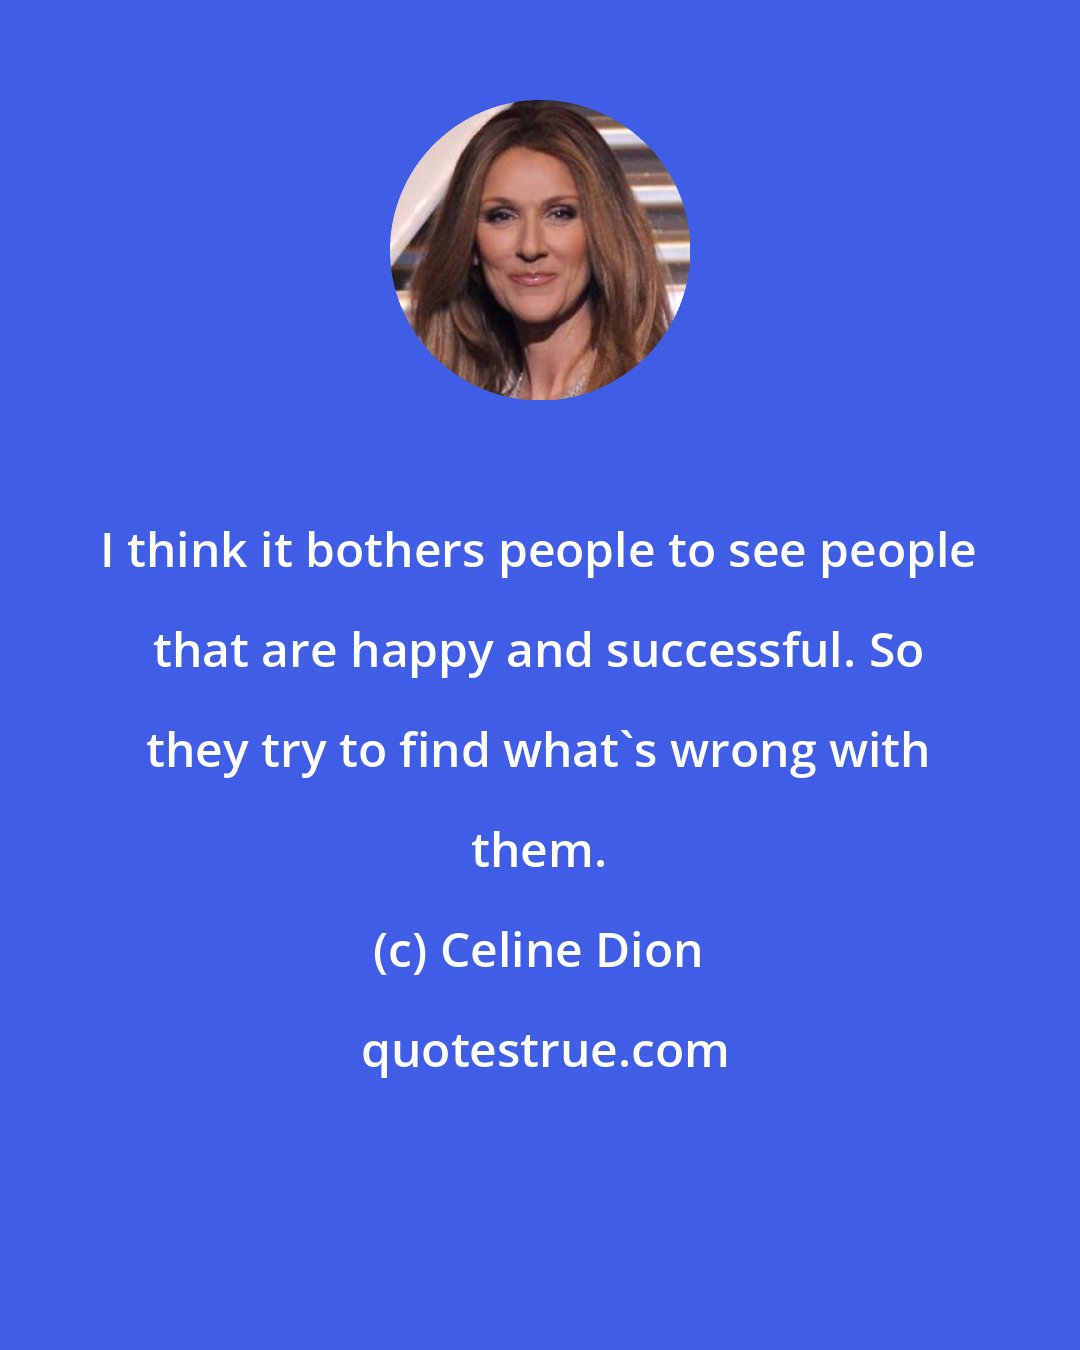 Celine Dion: I think it bothers people to see people that are happy and successful. So they try to find what's wrong with them.